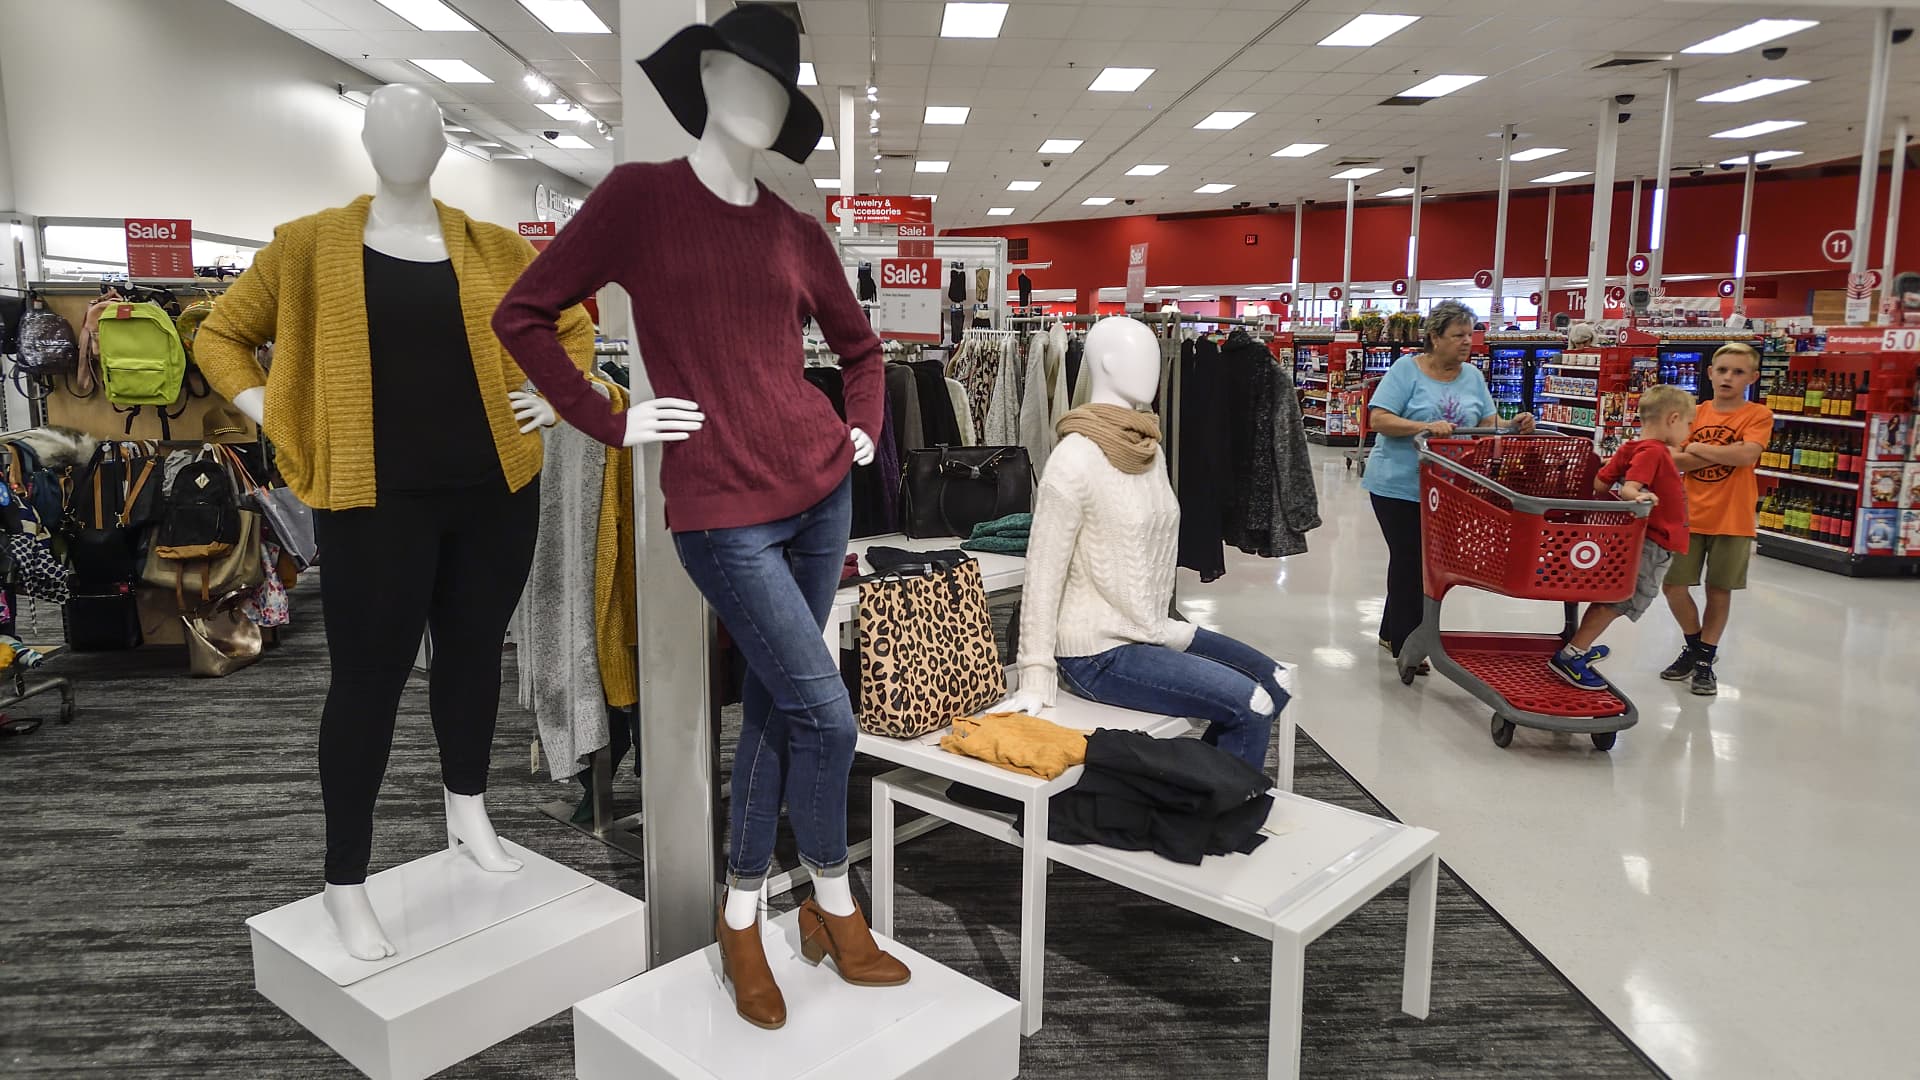 Target invests in cheap chic as sales slow